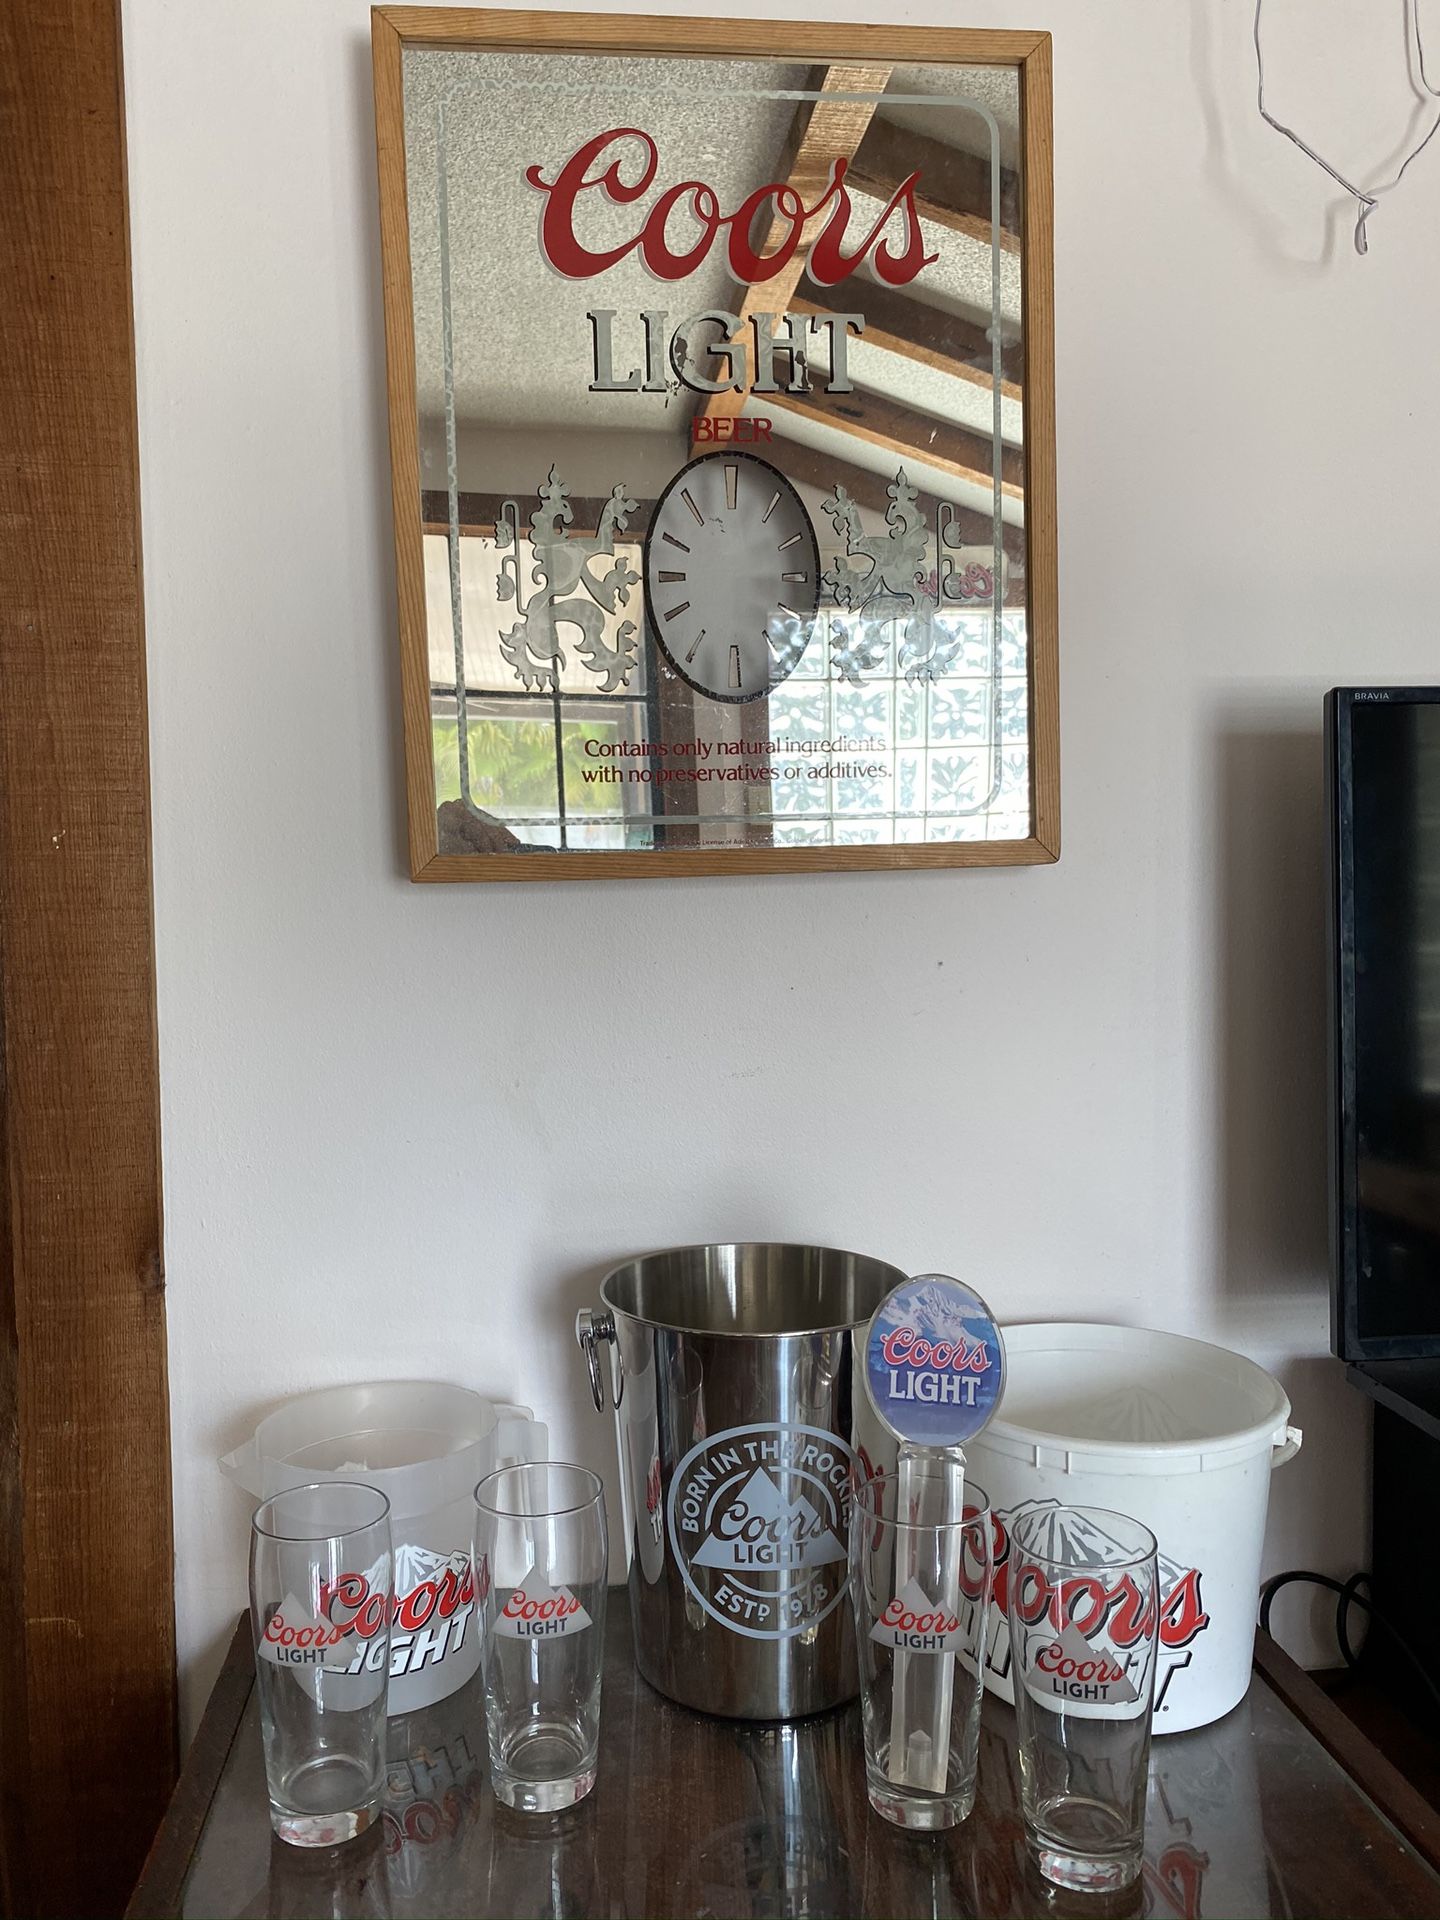 Coors Light collection